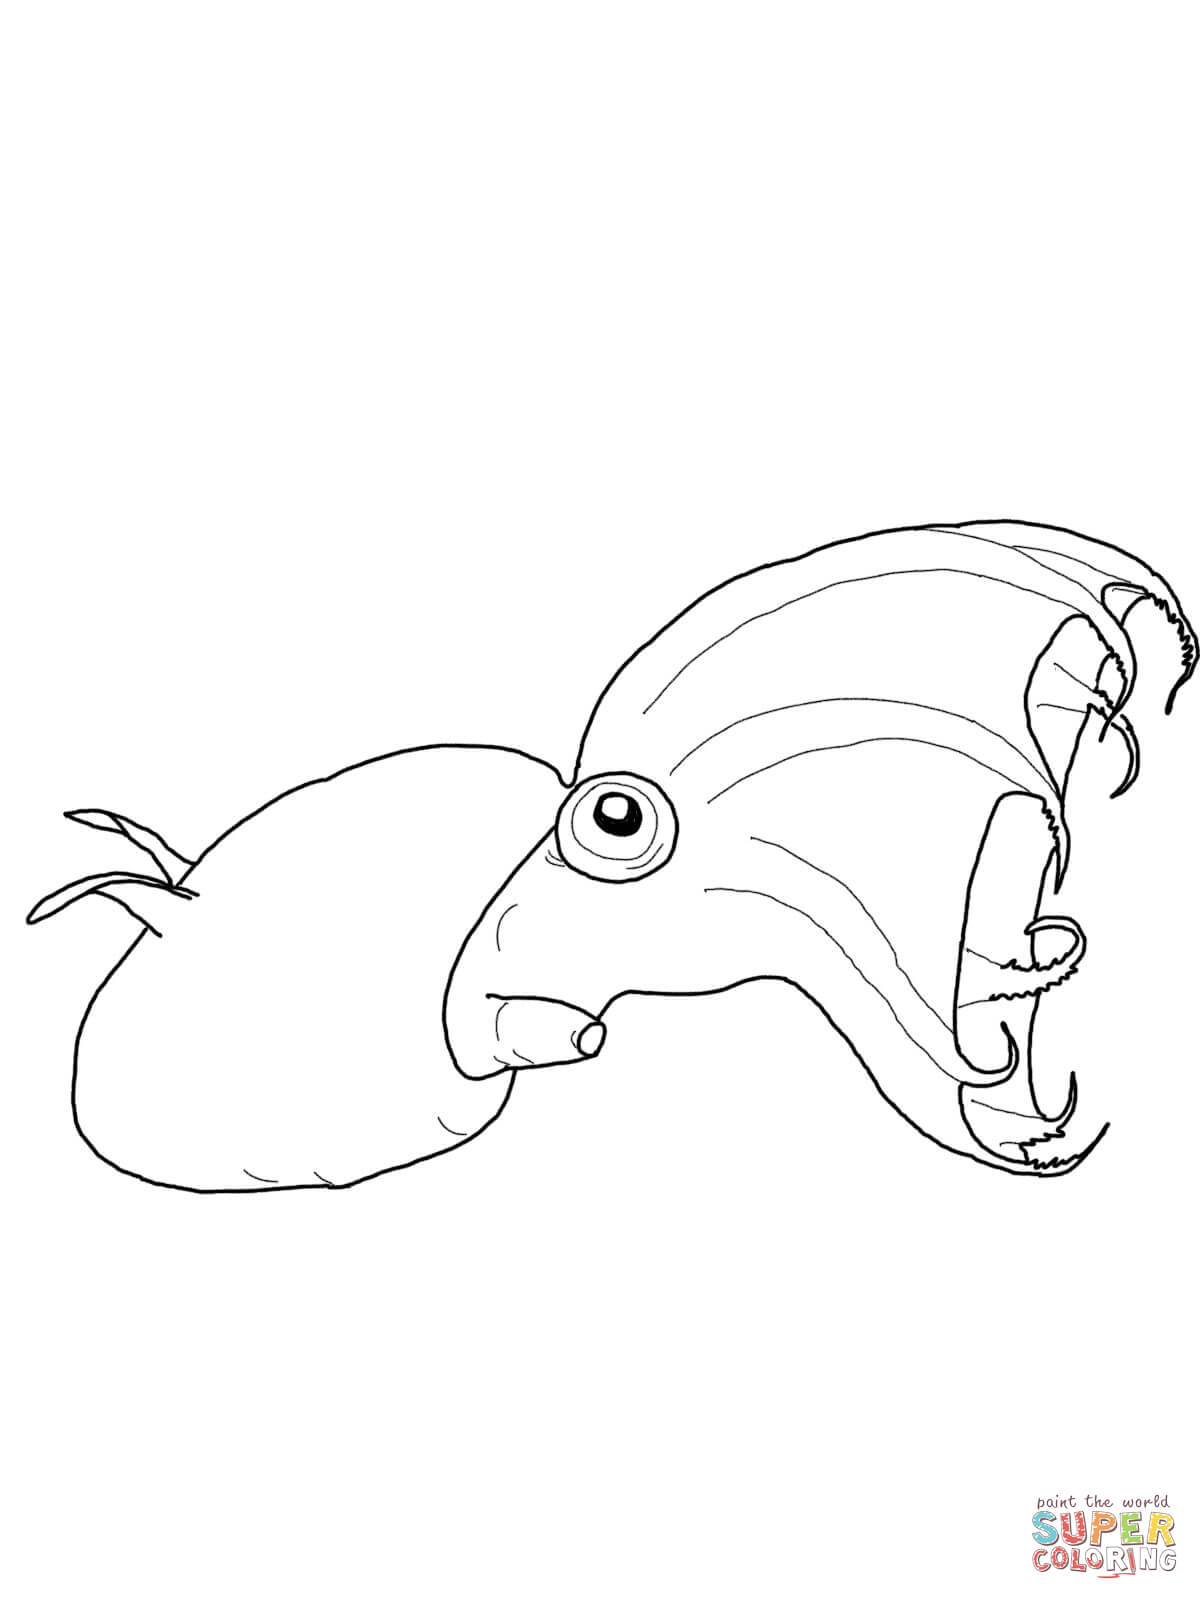 Squid Coloring Pages Printable Squid Coloring Pages Free Coloring Pages